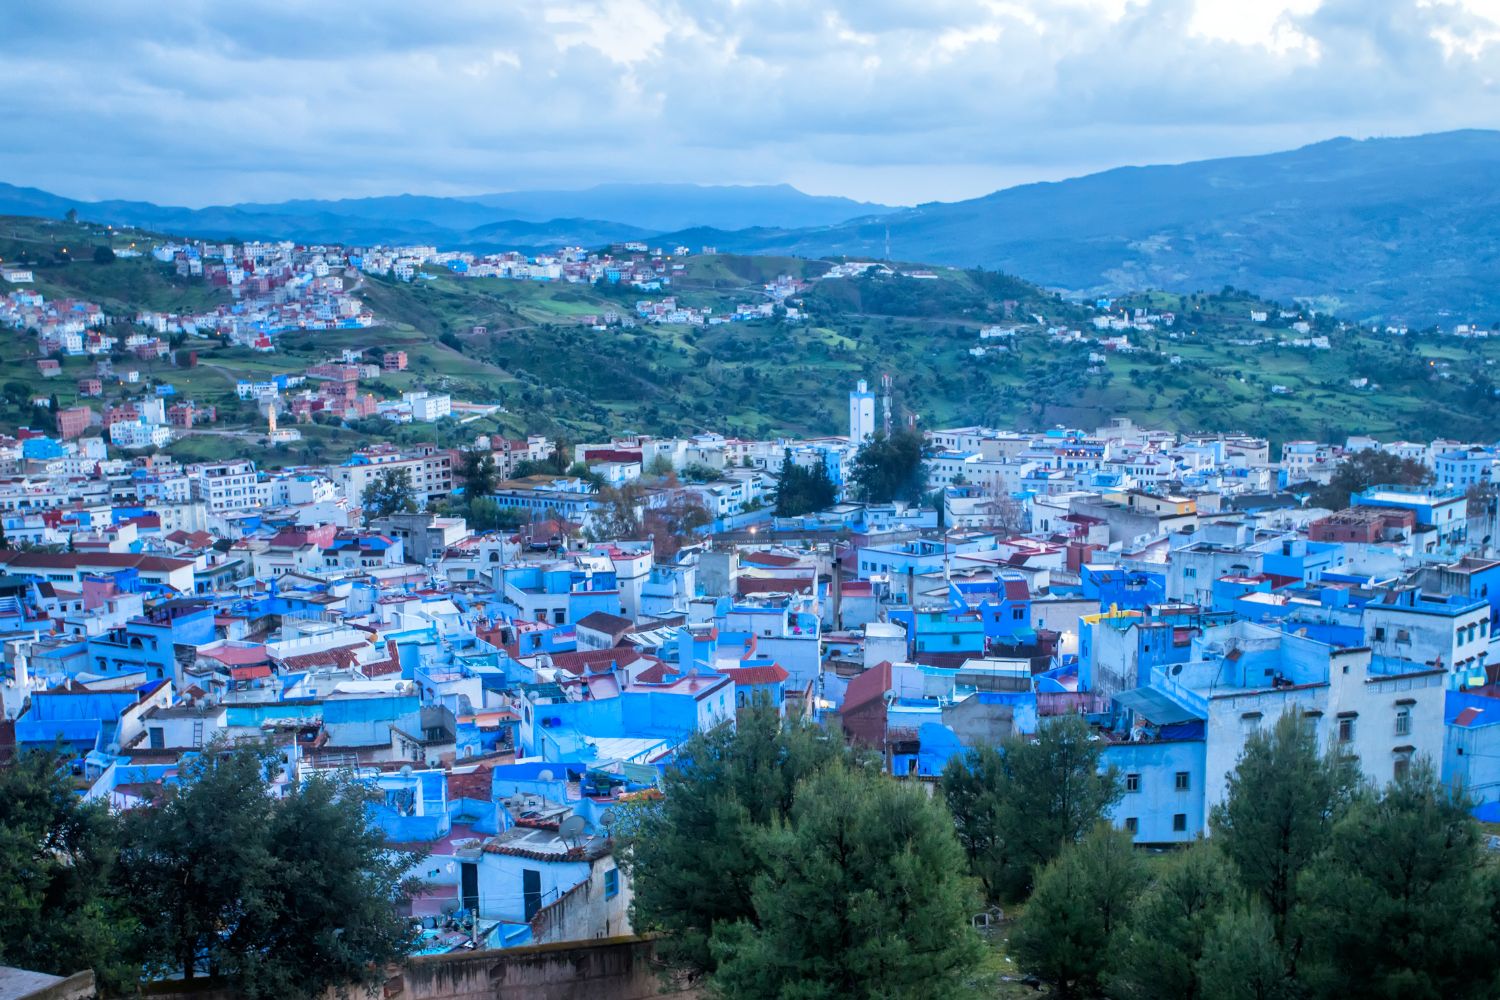 What to Visit in Chefchaouen